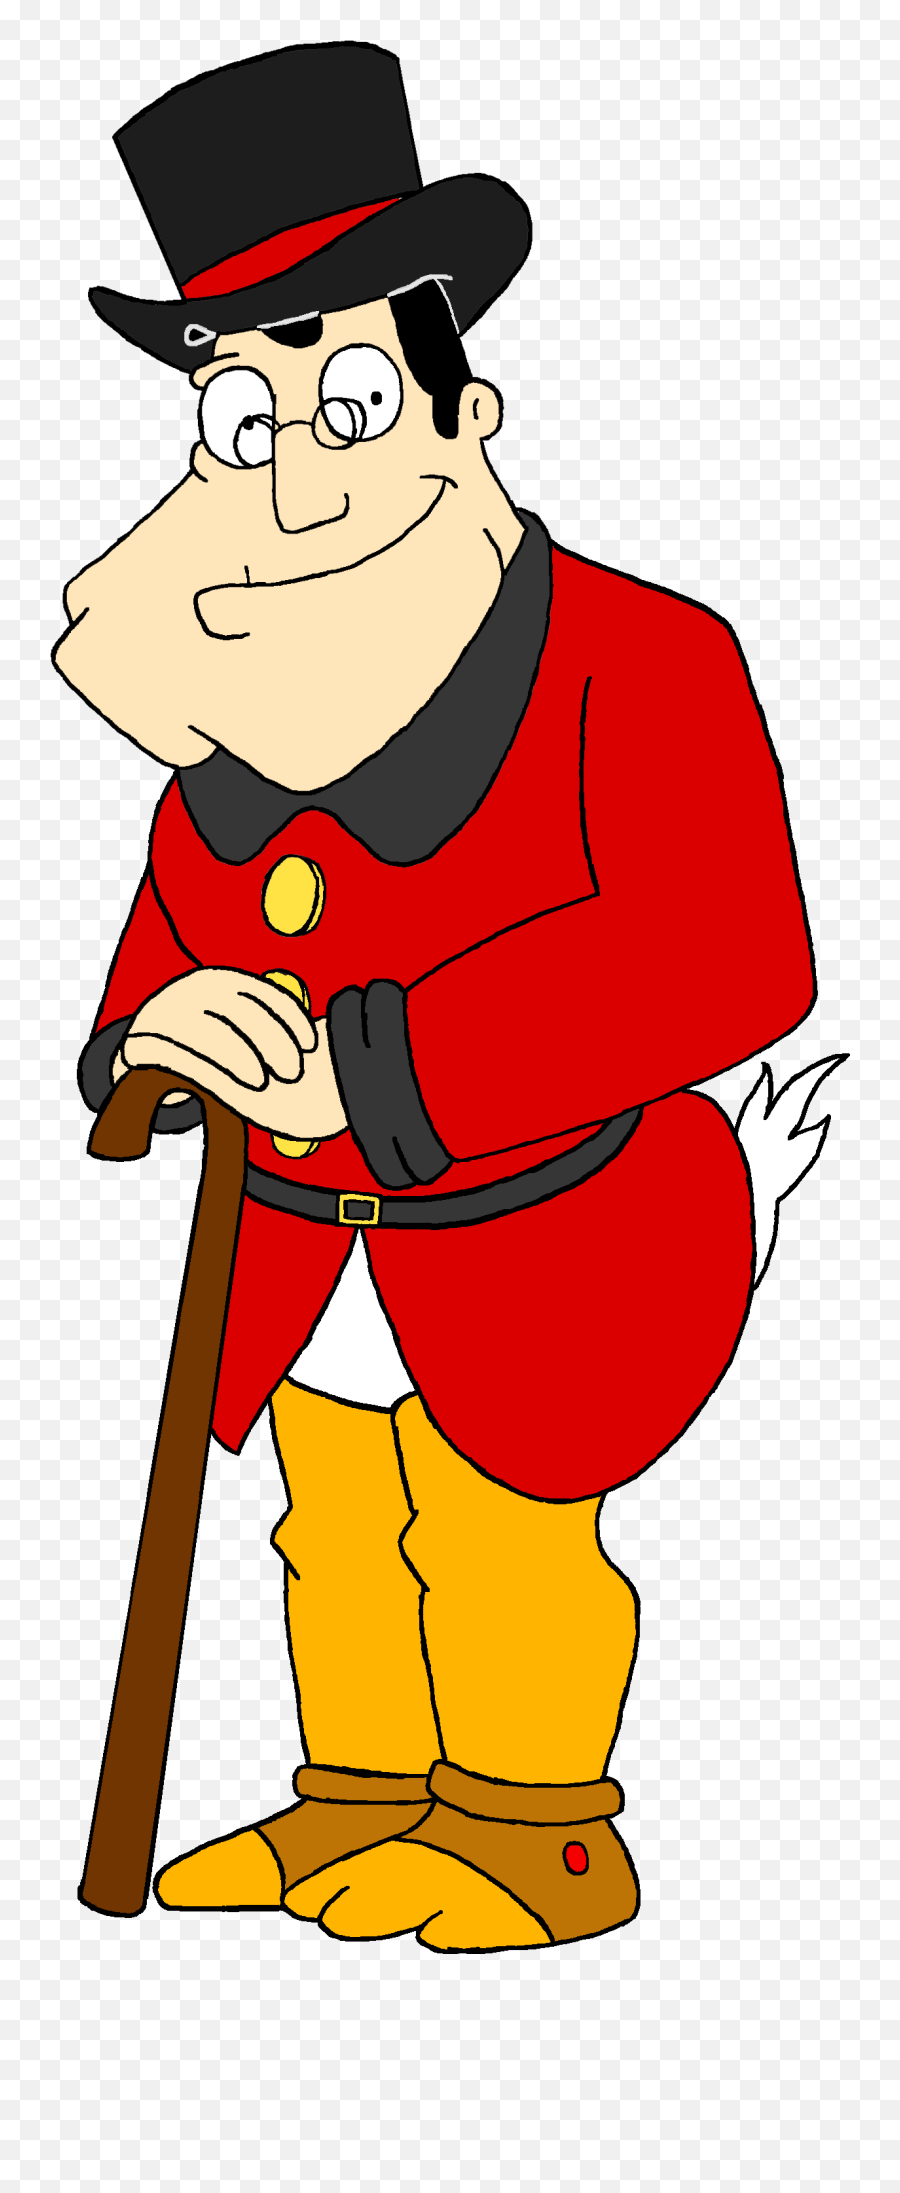 Stan Smith As Scrooge Mcduck Png Image - Scrooge Mcduck,Scrooge Mcduck Png